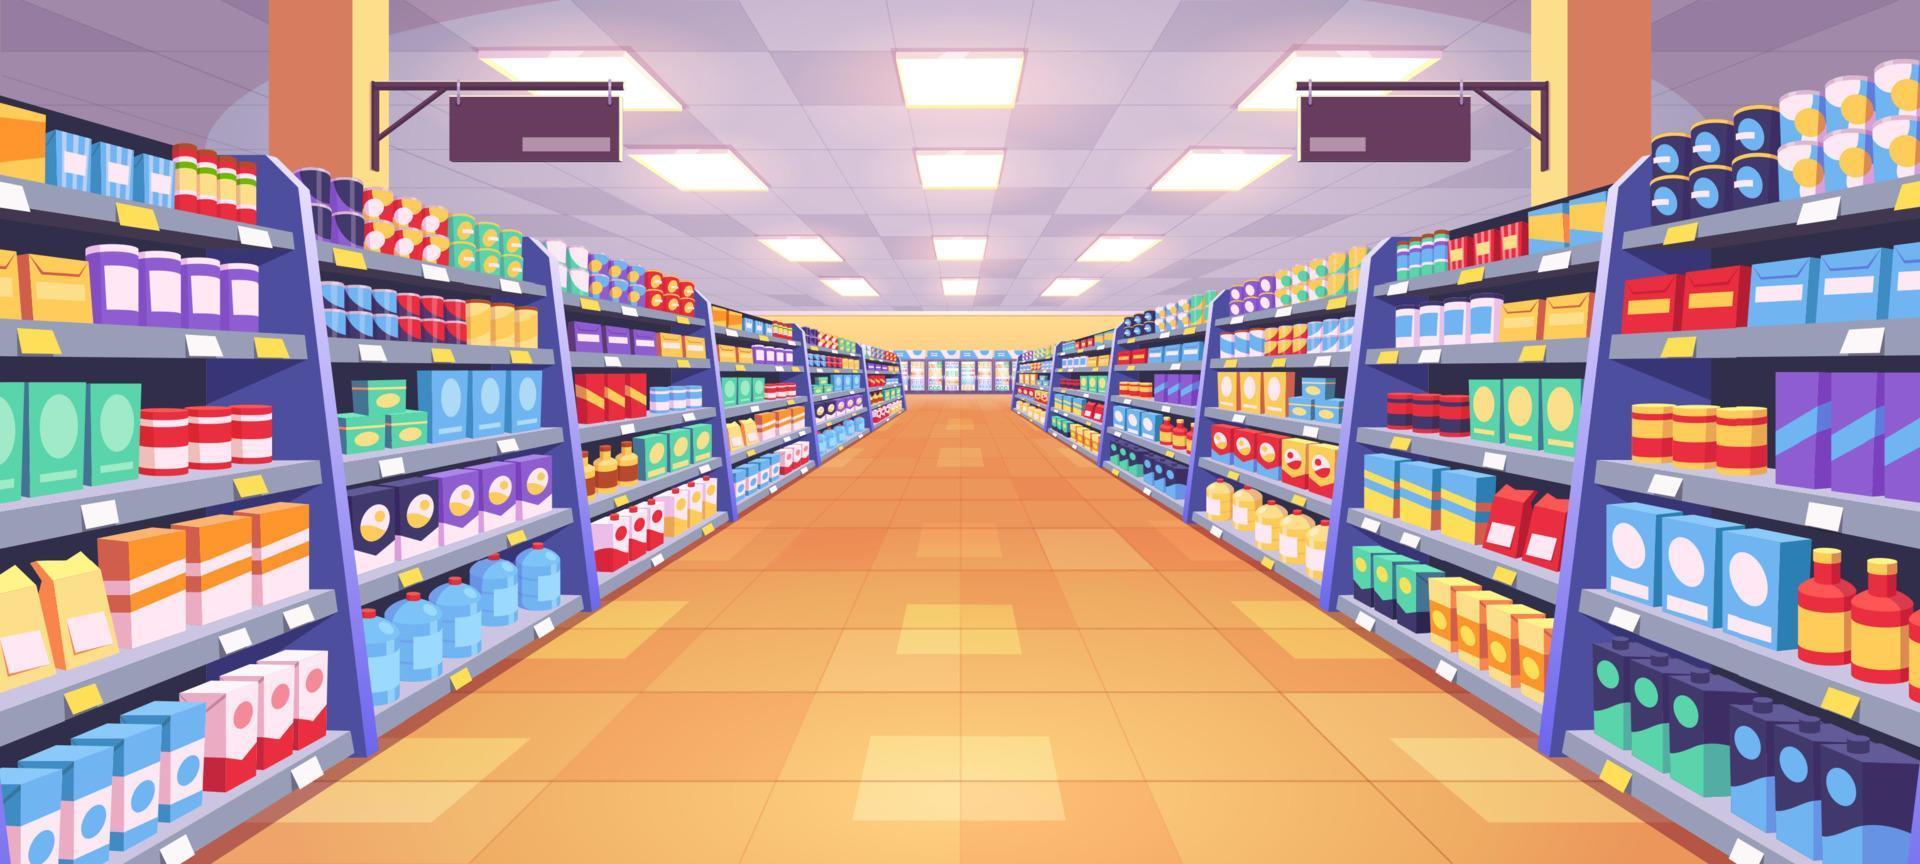 Aisle in grocery store, shelves vector background